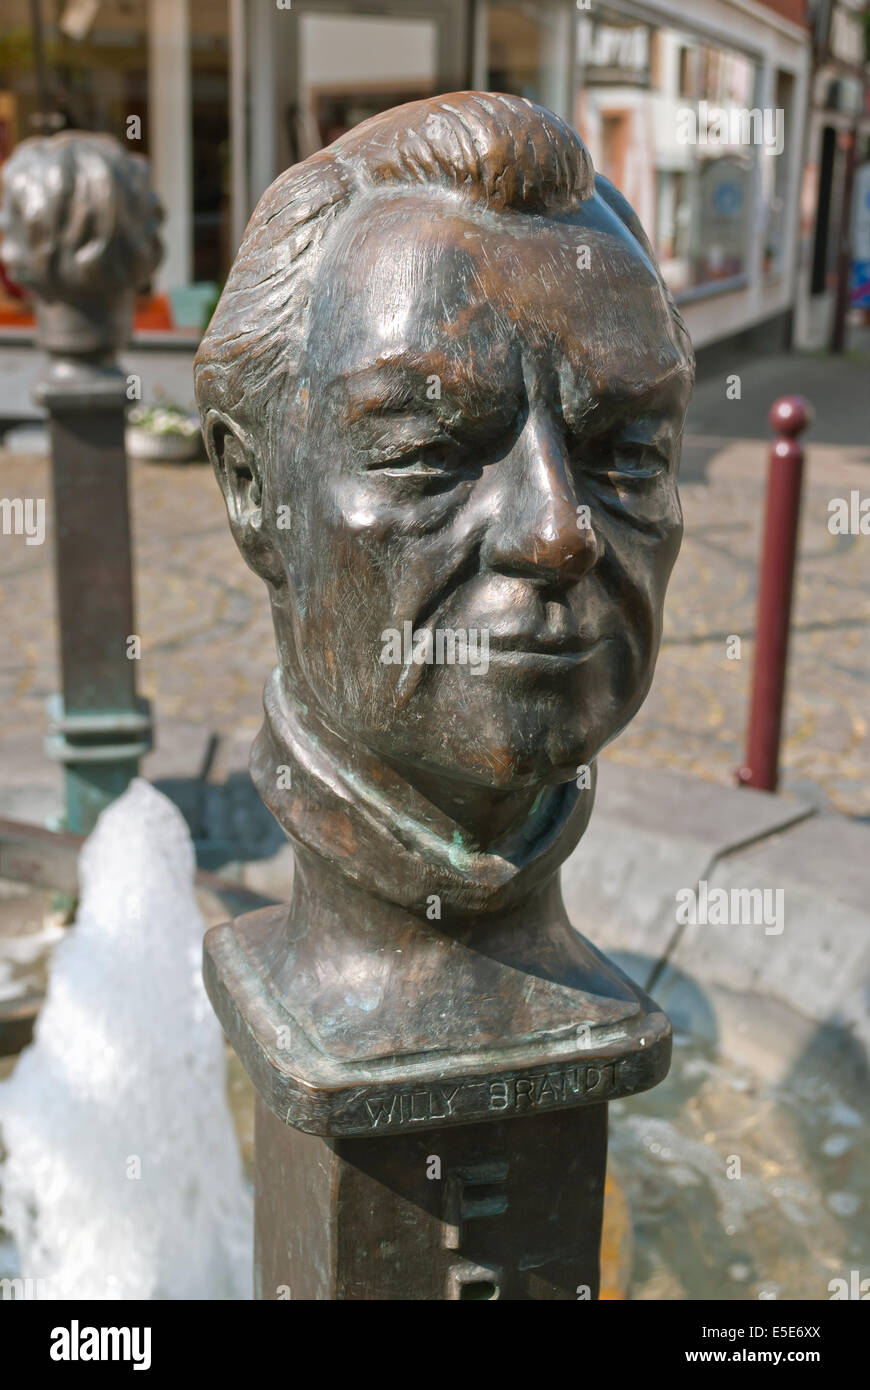 Statue of Willy Brandt as a part of a fountain in Unkel, a town in the district of Neuwied, in Rhineland-Palatinate, Germany Stock Photo